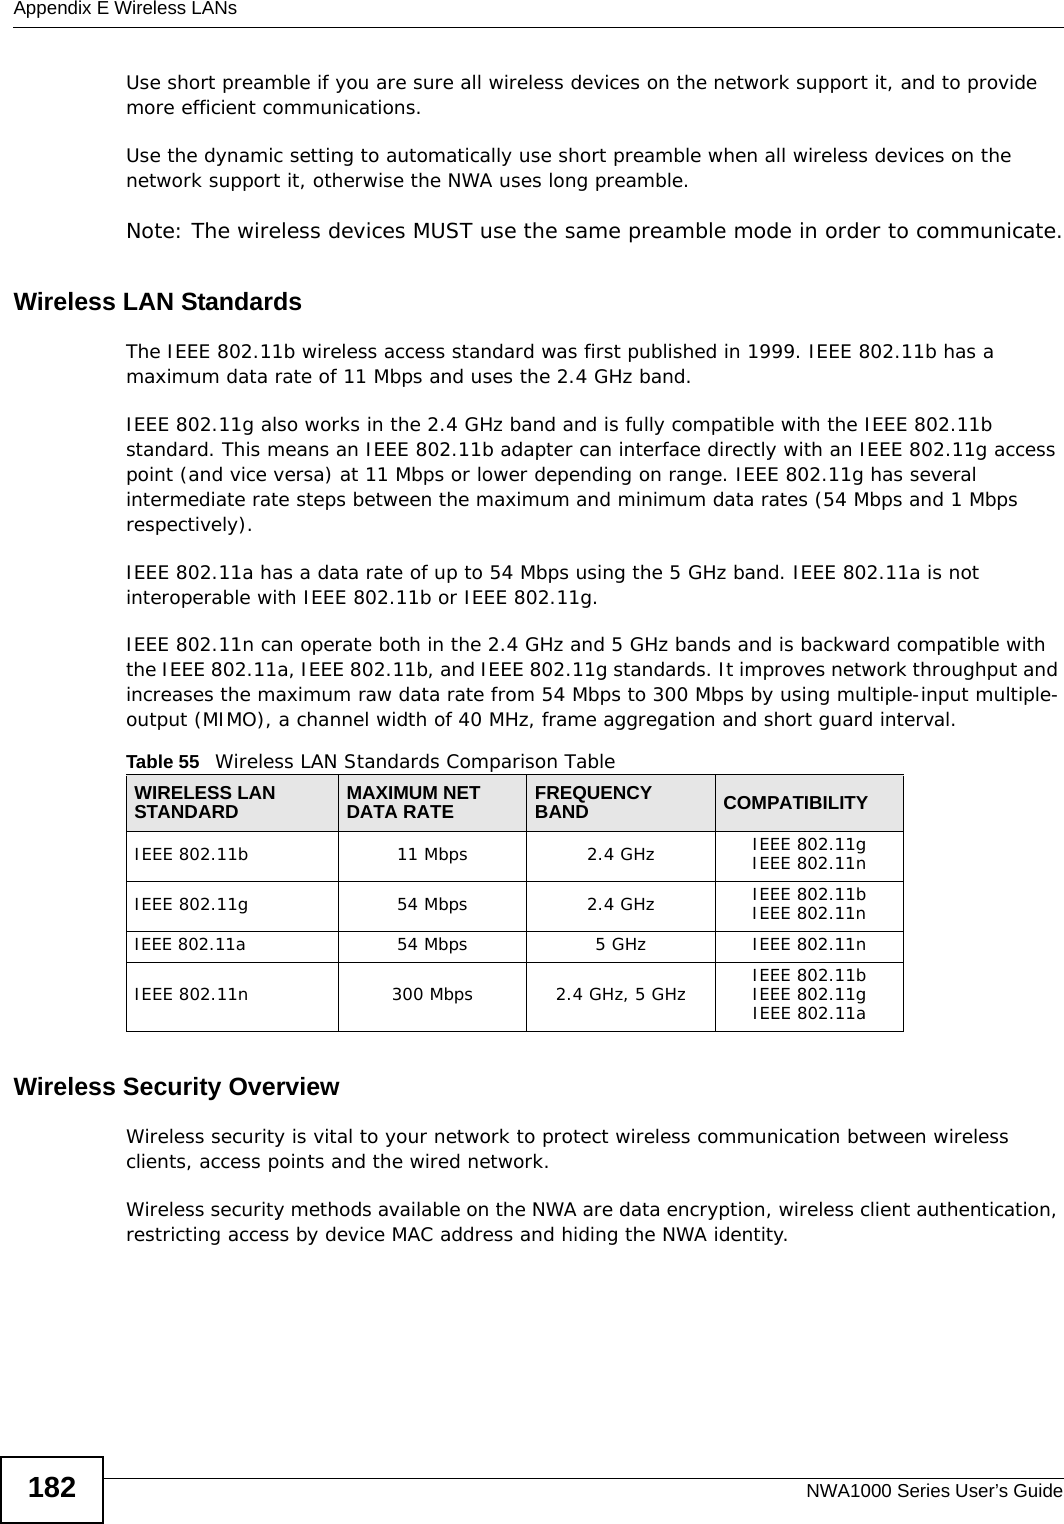 Appendix E Wireless LANsNWA1000 Series User’s Guide182Use short preamble if you are sure all wireless devices on the network support it, and to provide more efficient communications.Use the dynamic setting to automatically use short preamble when all wireless devices on the network support it, otherwise the NWA uses long preamble.Note: The wireless devices MUST use the same preamble mode in order to communicate.Wireless LAN StandardsThe IEEE 802.11b wireless access standard was first published in 1999. IEEE 802.11b has a maximum data rate of 11 Mbps and uses the 2.4 GHz band.IEEE 802.11g also works in the 2.4 GHz band and is fully compatible with the IEEE 802.11b standard. This means an IEEE 802.11b adapter can interface directly with an IEEE 802.11g access point (and vice versa) at 11 Mbps or lower depending on range. IEEE 802.11g has several intermediate rate steps between the maximum and minimum data rates (54 Mbps and 1 Mbps respectively).IEEE 802.11a has a data rate of up to 54 Mbps using the 5 GHz band. IEEE 802.11a is not interoperable with IEEE 802.11b or IEEE 802.11g.IEEE 802.11n can operate both in the 2.4 GHz and 5 GHz bands and is backward compatible with the IEEE 802.11a, IEEE 802.11b, and IEEE 802.11g standards. It improves network throughput and increases the maximum raw data rate from 54 Mbps to 300 Mbps by using multiple-input multiple-output (MIMO), a channel width of 40 MHz, frame aggregation and short guard interval.Wireless Security OverviewWireless security is vital to your network to protect wireless communication between wireless clients, access points and the wired network.Wireless security methods available on the NWA are data encryption, wireless client authentication, restricting access by device MAC address and hiding the NWA identity.Table 55   Wireless LAN Standards Comparison TableWIRELESS LAN STANDARD MAXIMUM NET DATA RATE FREQUENCY BAND COMPATIBILITYIEEE 802.11b 11 Mbps 2.4 GHz IEEE 802.11gIEEE 802.11nIEEE 802.11g 54 Mbps 2.4 GHz IEEE 802.11bIEEE 802.11nIEEE 802.11a54 Mbps 5 GHz IEEE 802.11nIEEE 802.11n 300 Mbps 2.4 GHz, 5 GHz IEEE 802.11bIEEE 802.11gIEEE 802.11a